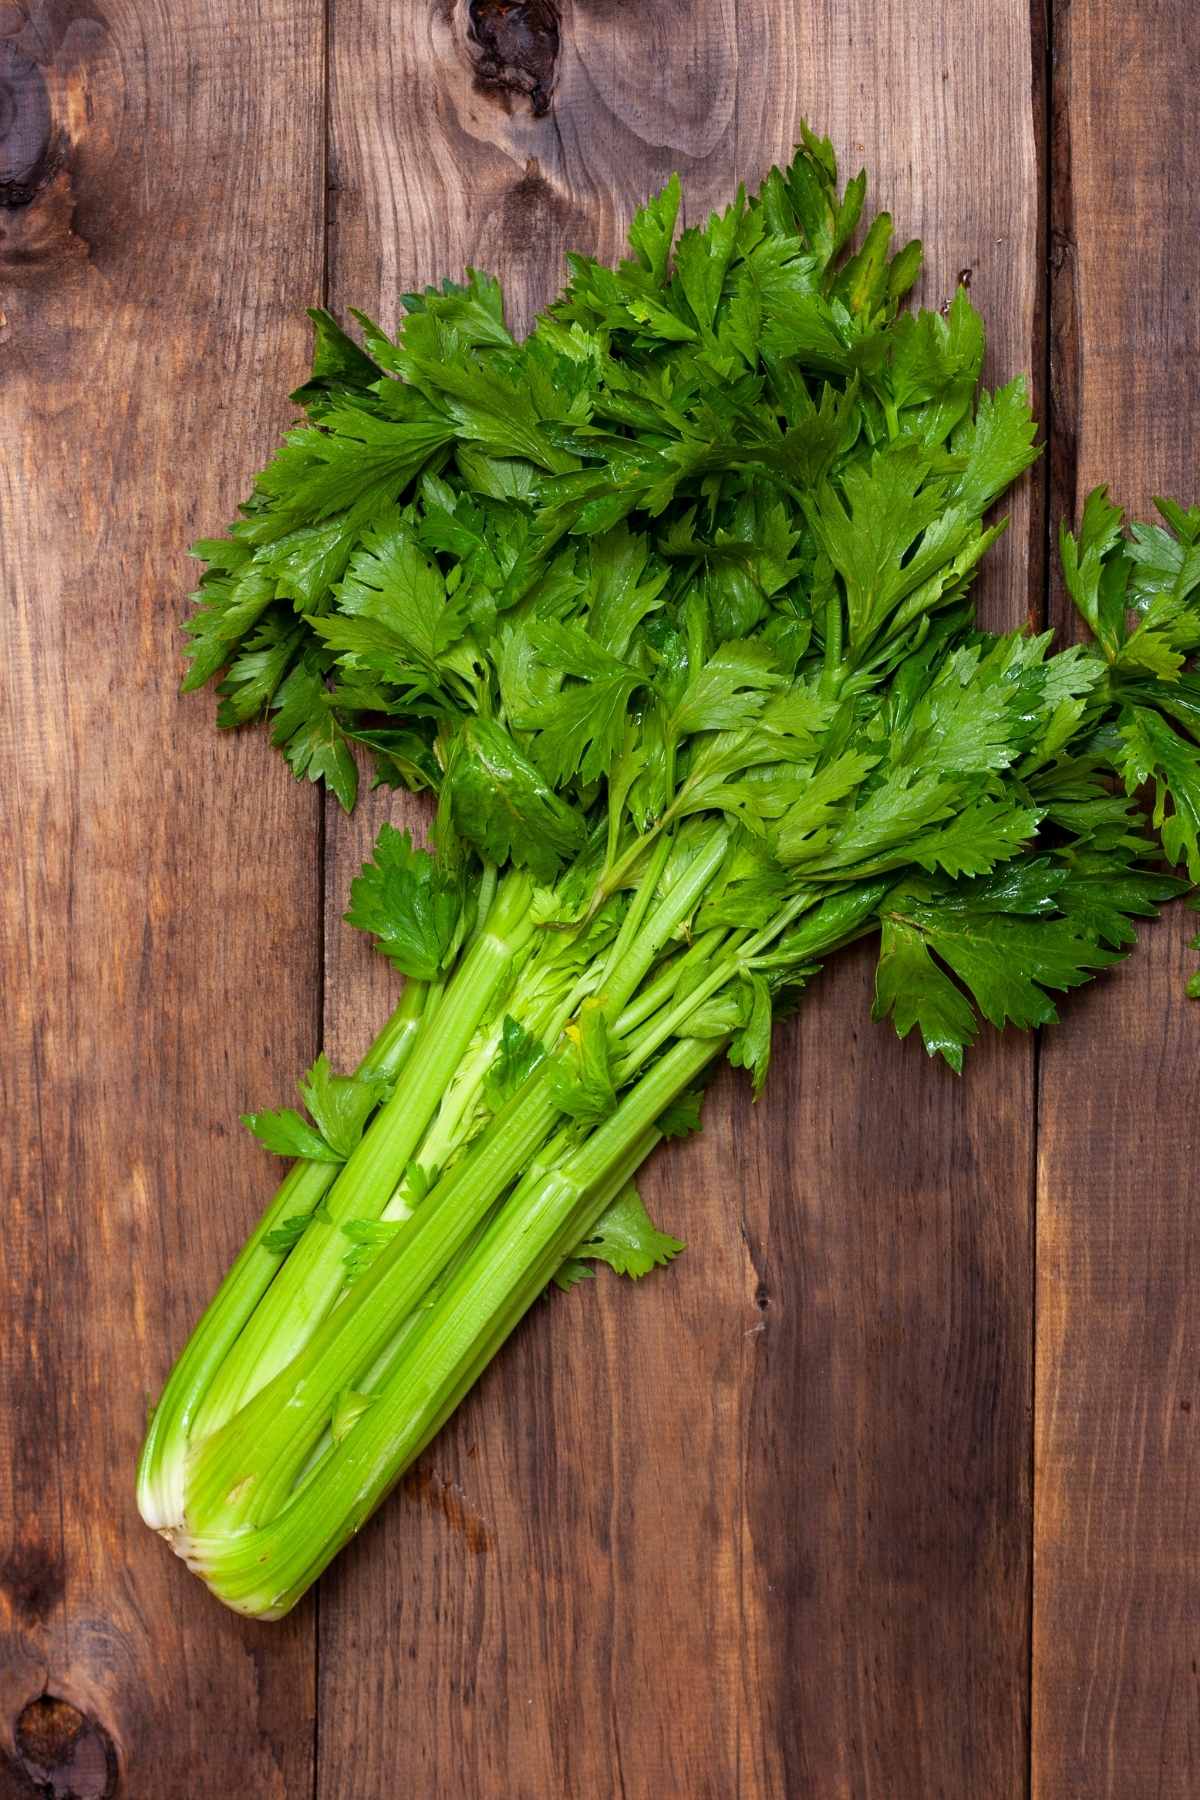 If you love the crunch of celery, you definitely want to properly store it so it stays fresh for as long as possible. In today’s article, we’re sharing some useful information on how to properly store celery. 